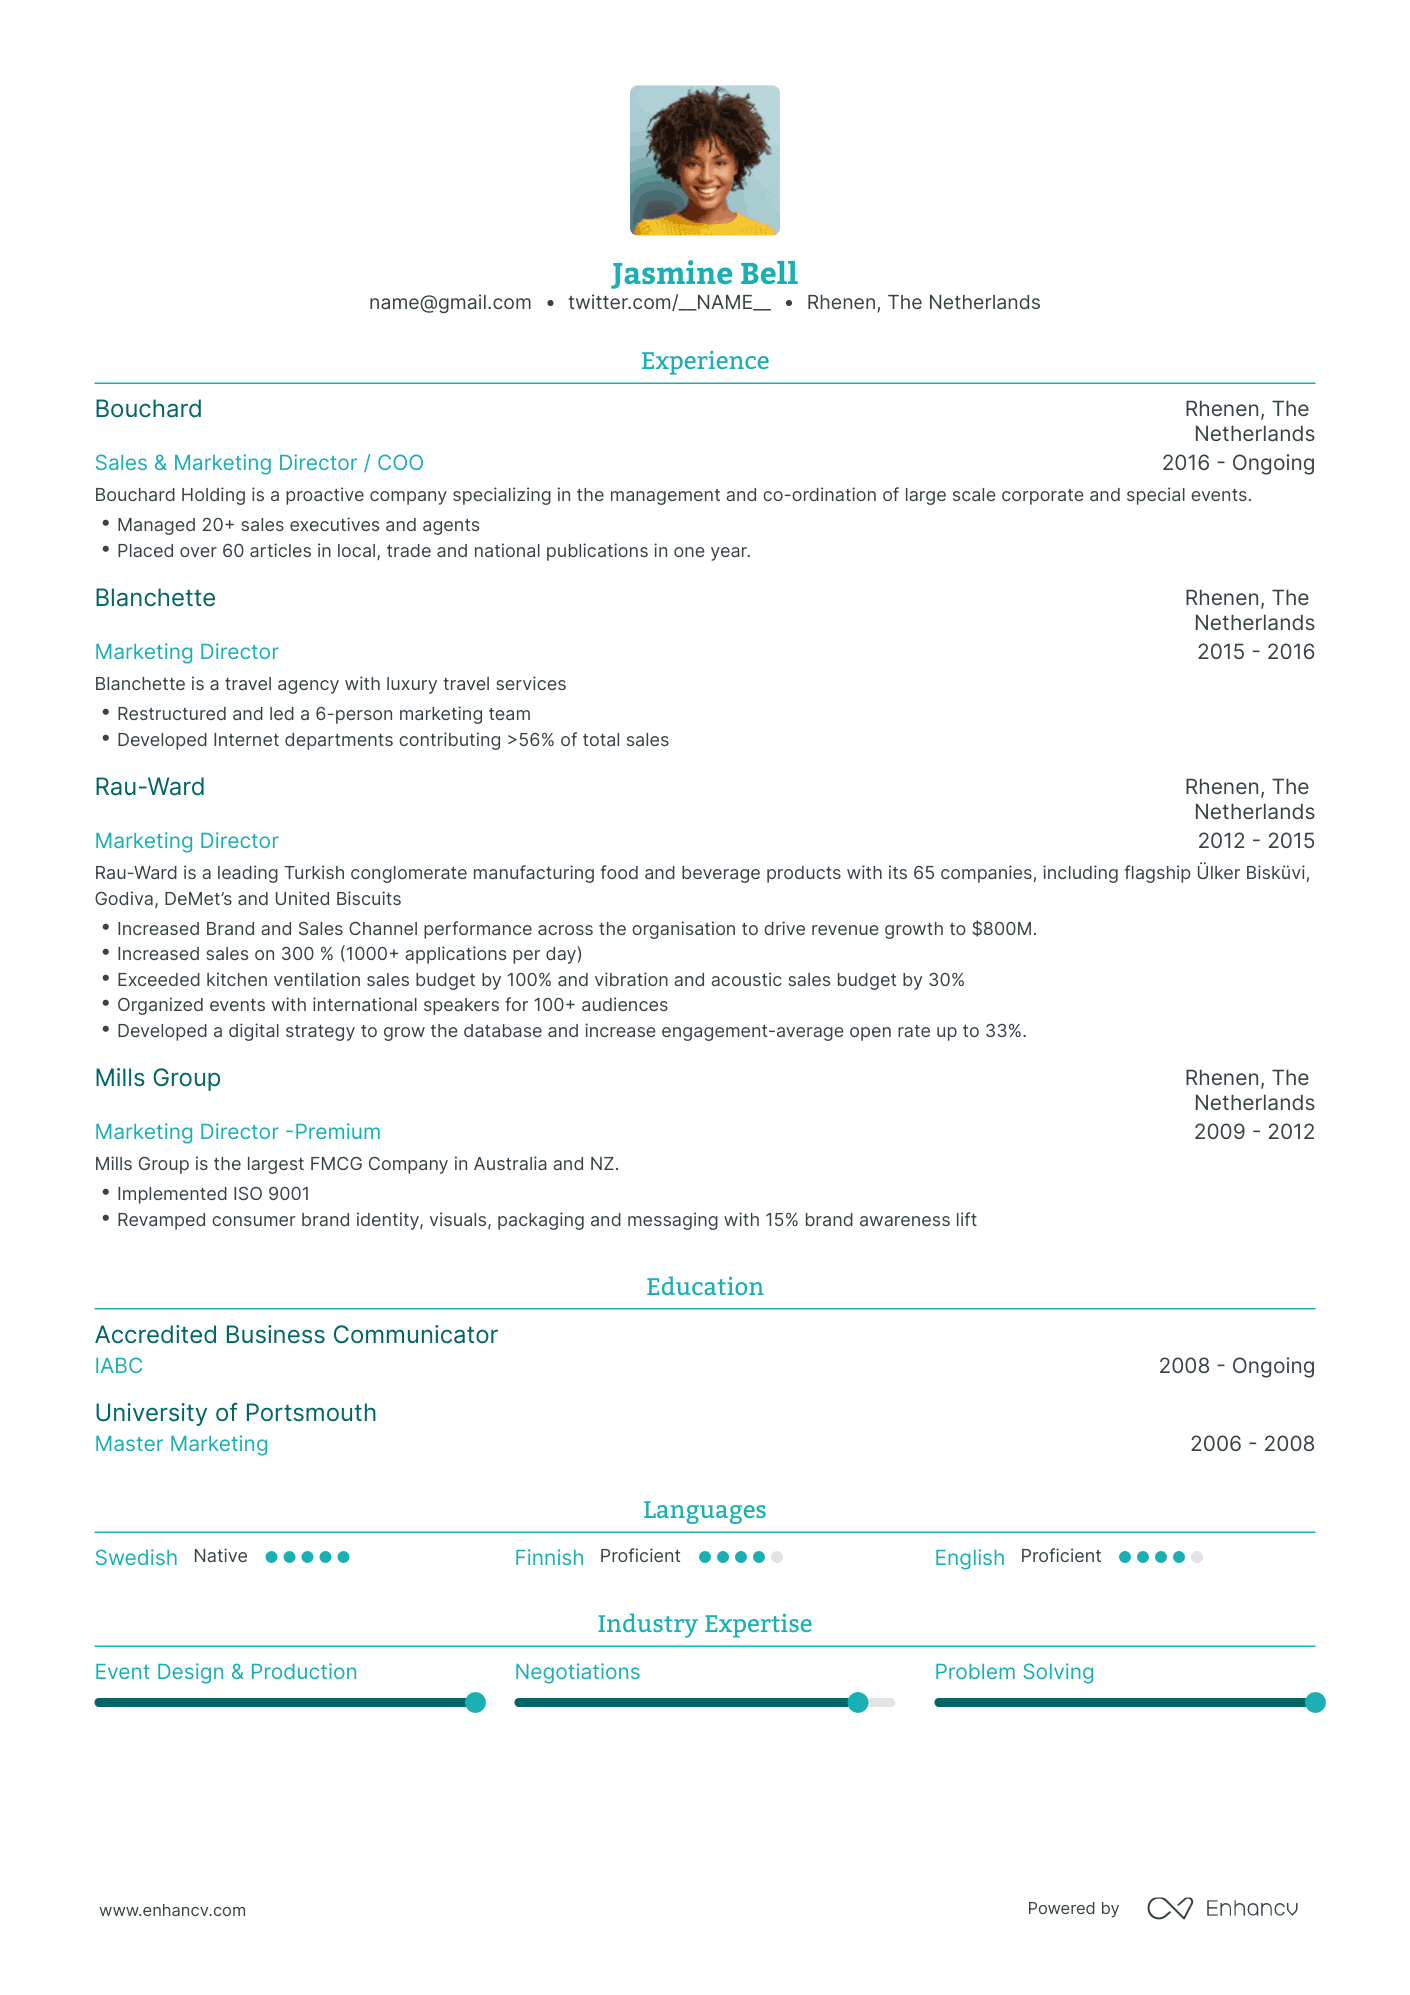 Traditional VP Marketing Resume Template